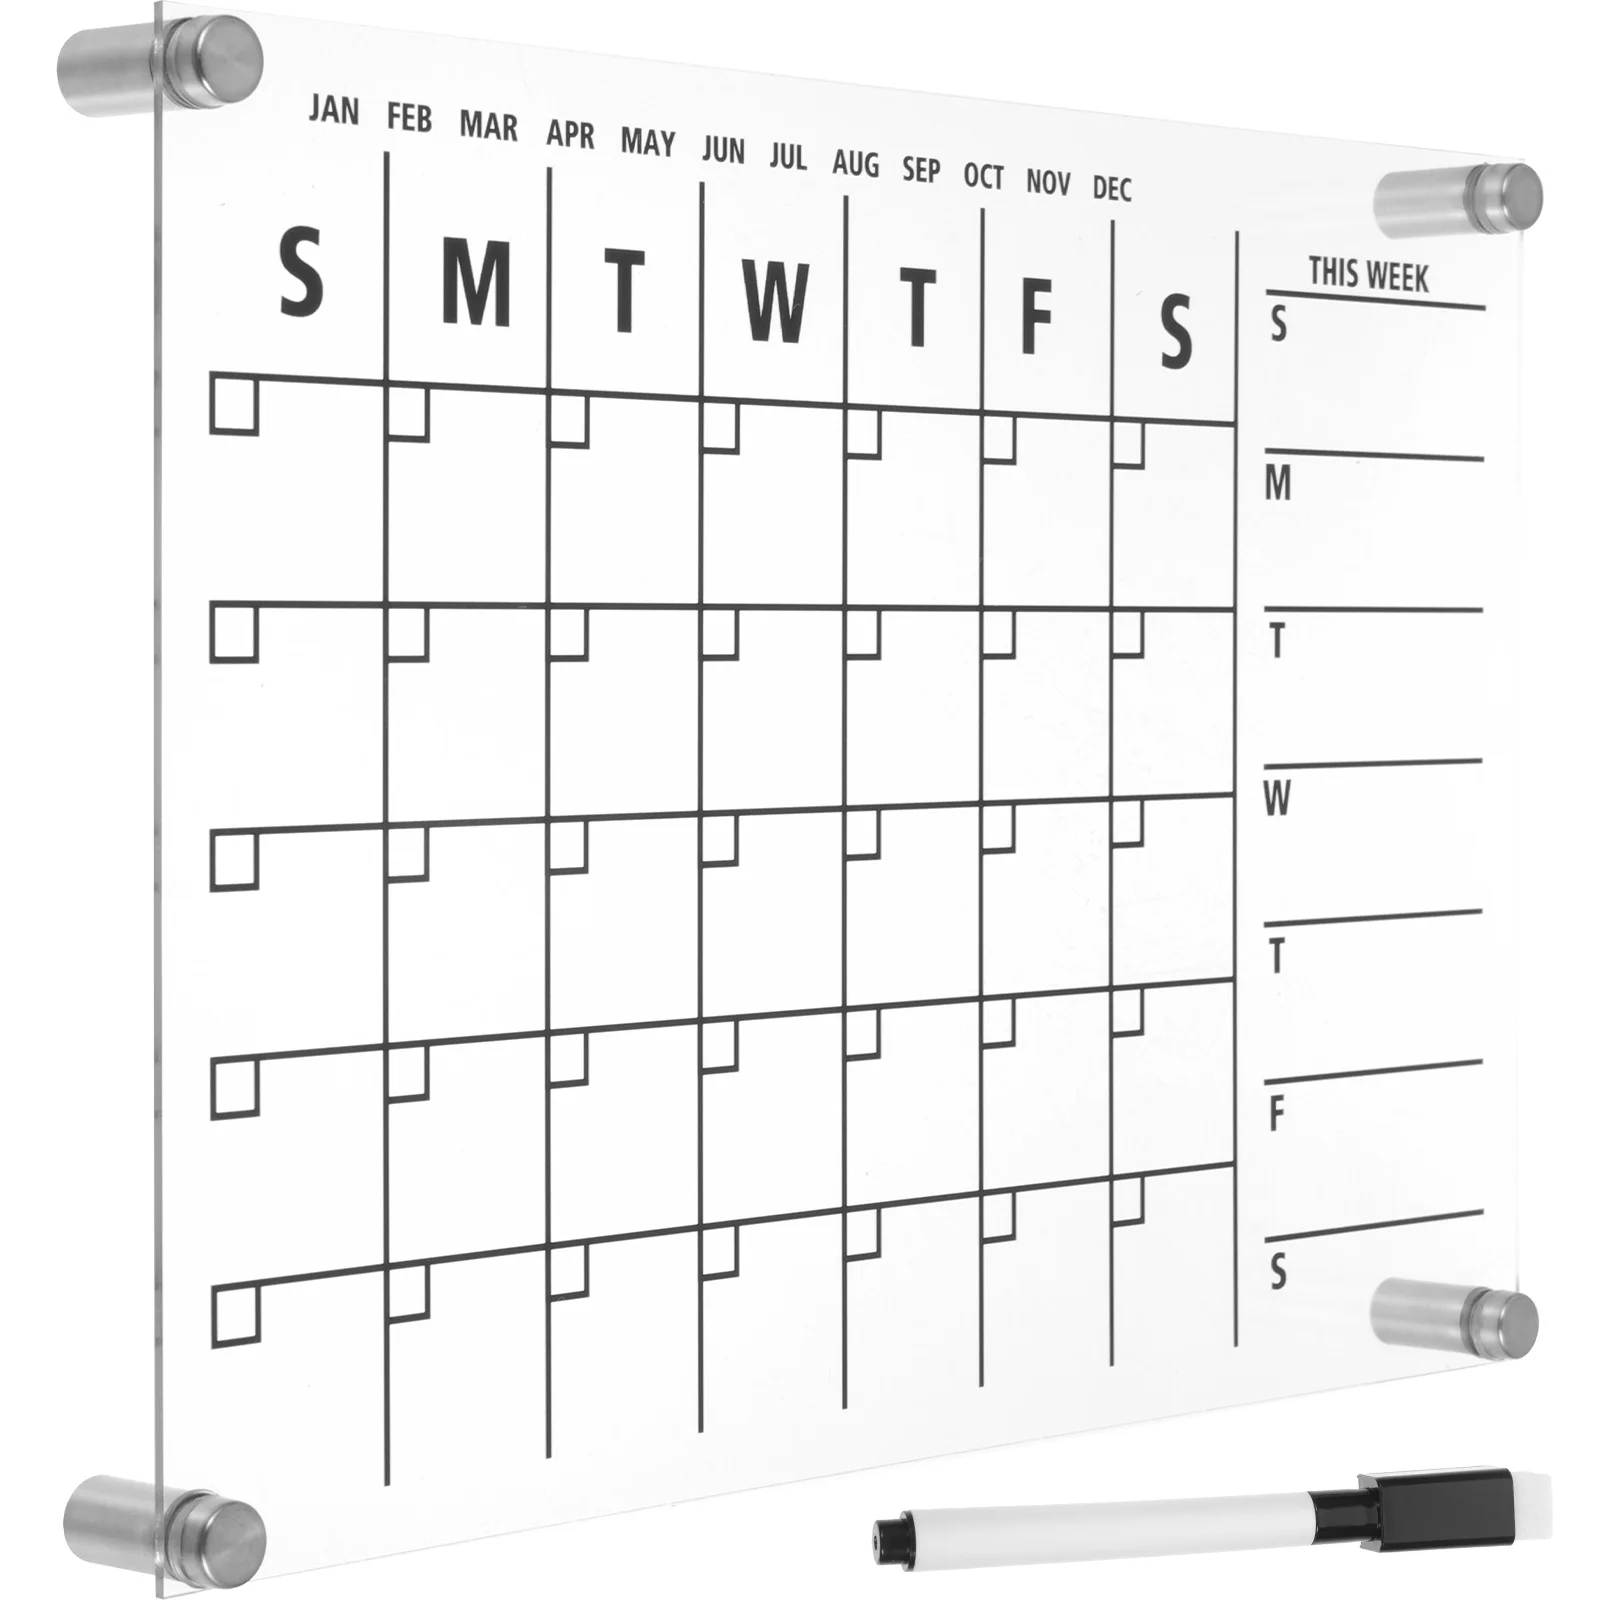 

Calendar Dry Board Erase Wall Planner Acrylic Weekly Refrigerator Fridge Month Sheets Memo Plan Schedule Daily Notice Message